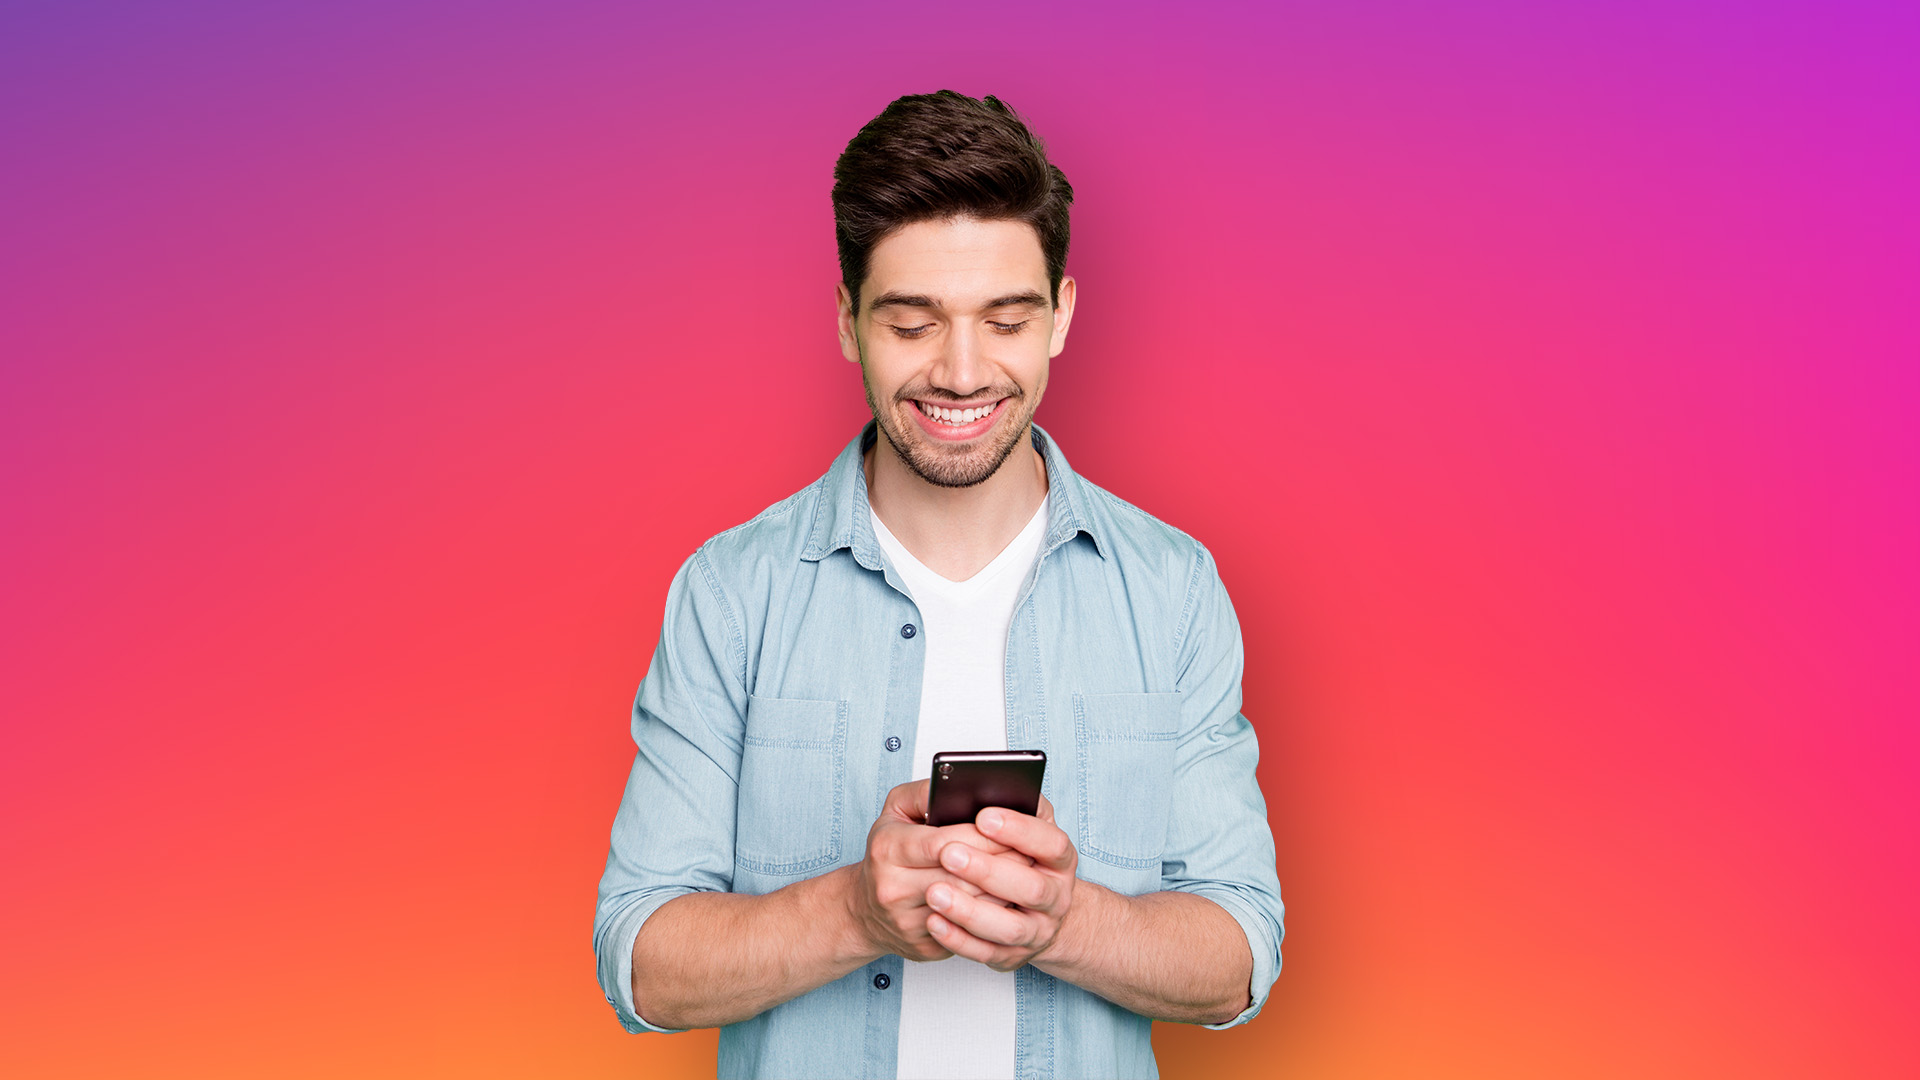 Instagram Marketing Guide: 9 Tips That Actually Work